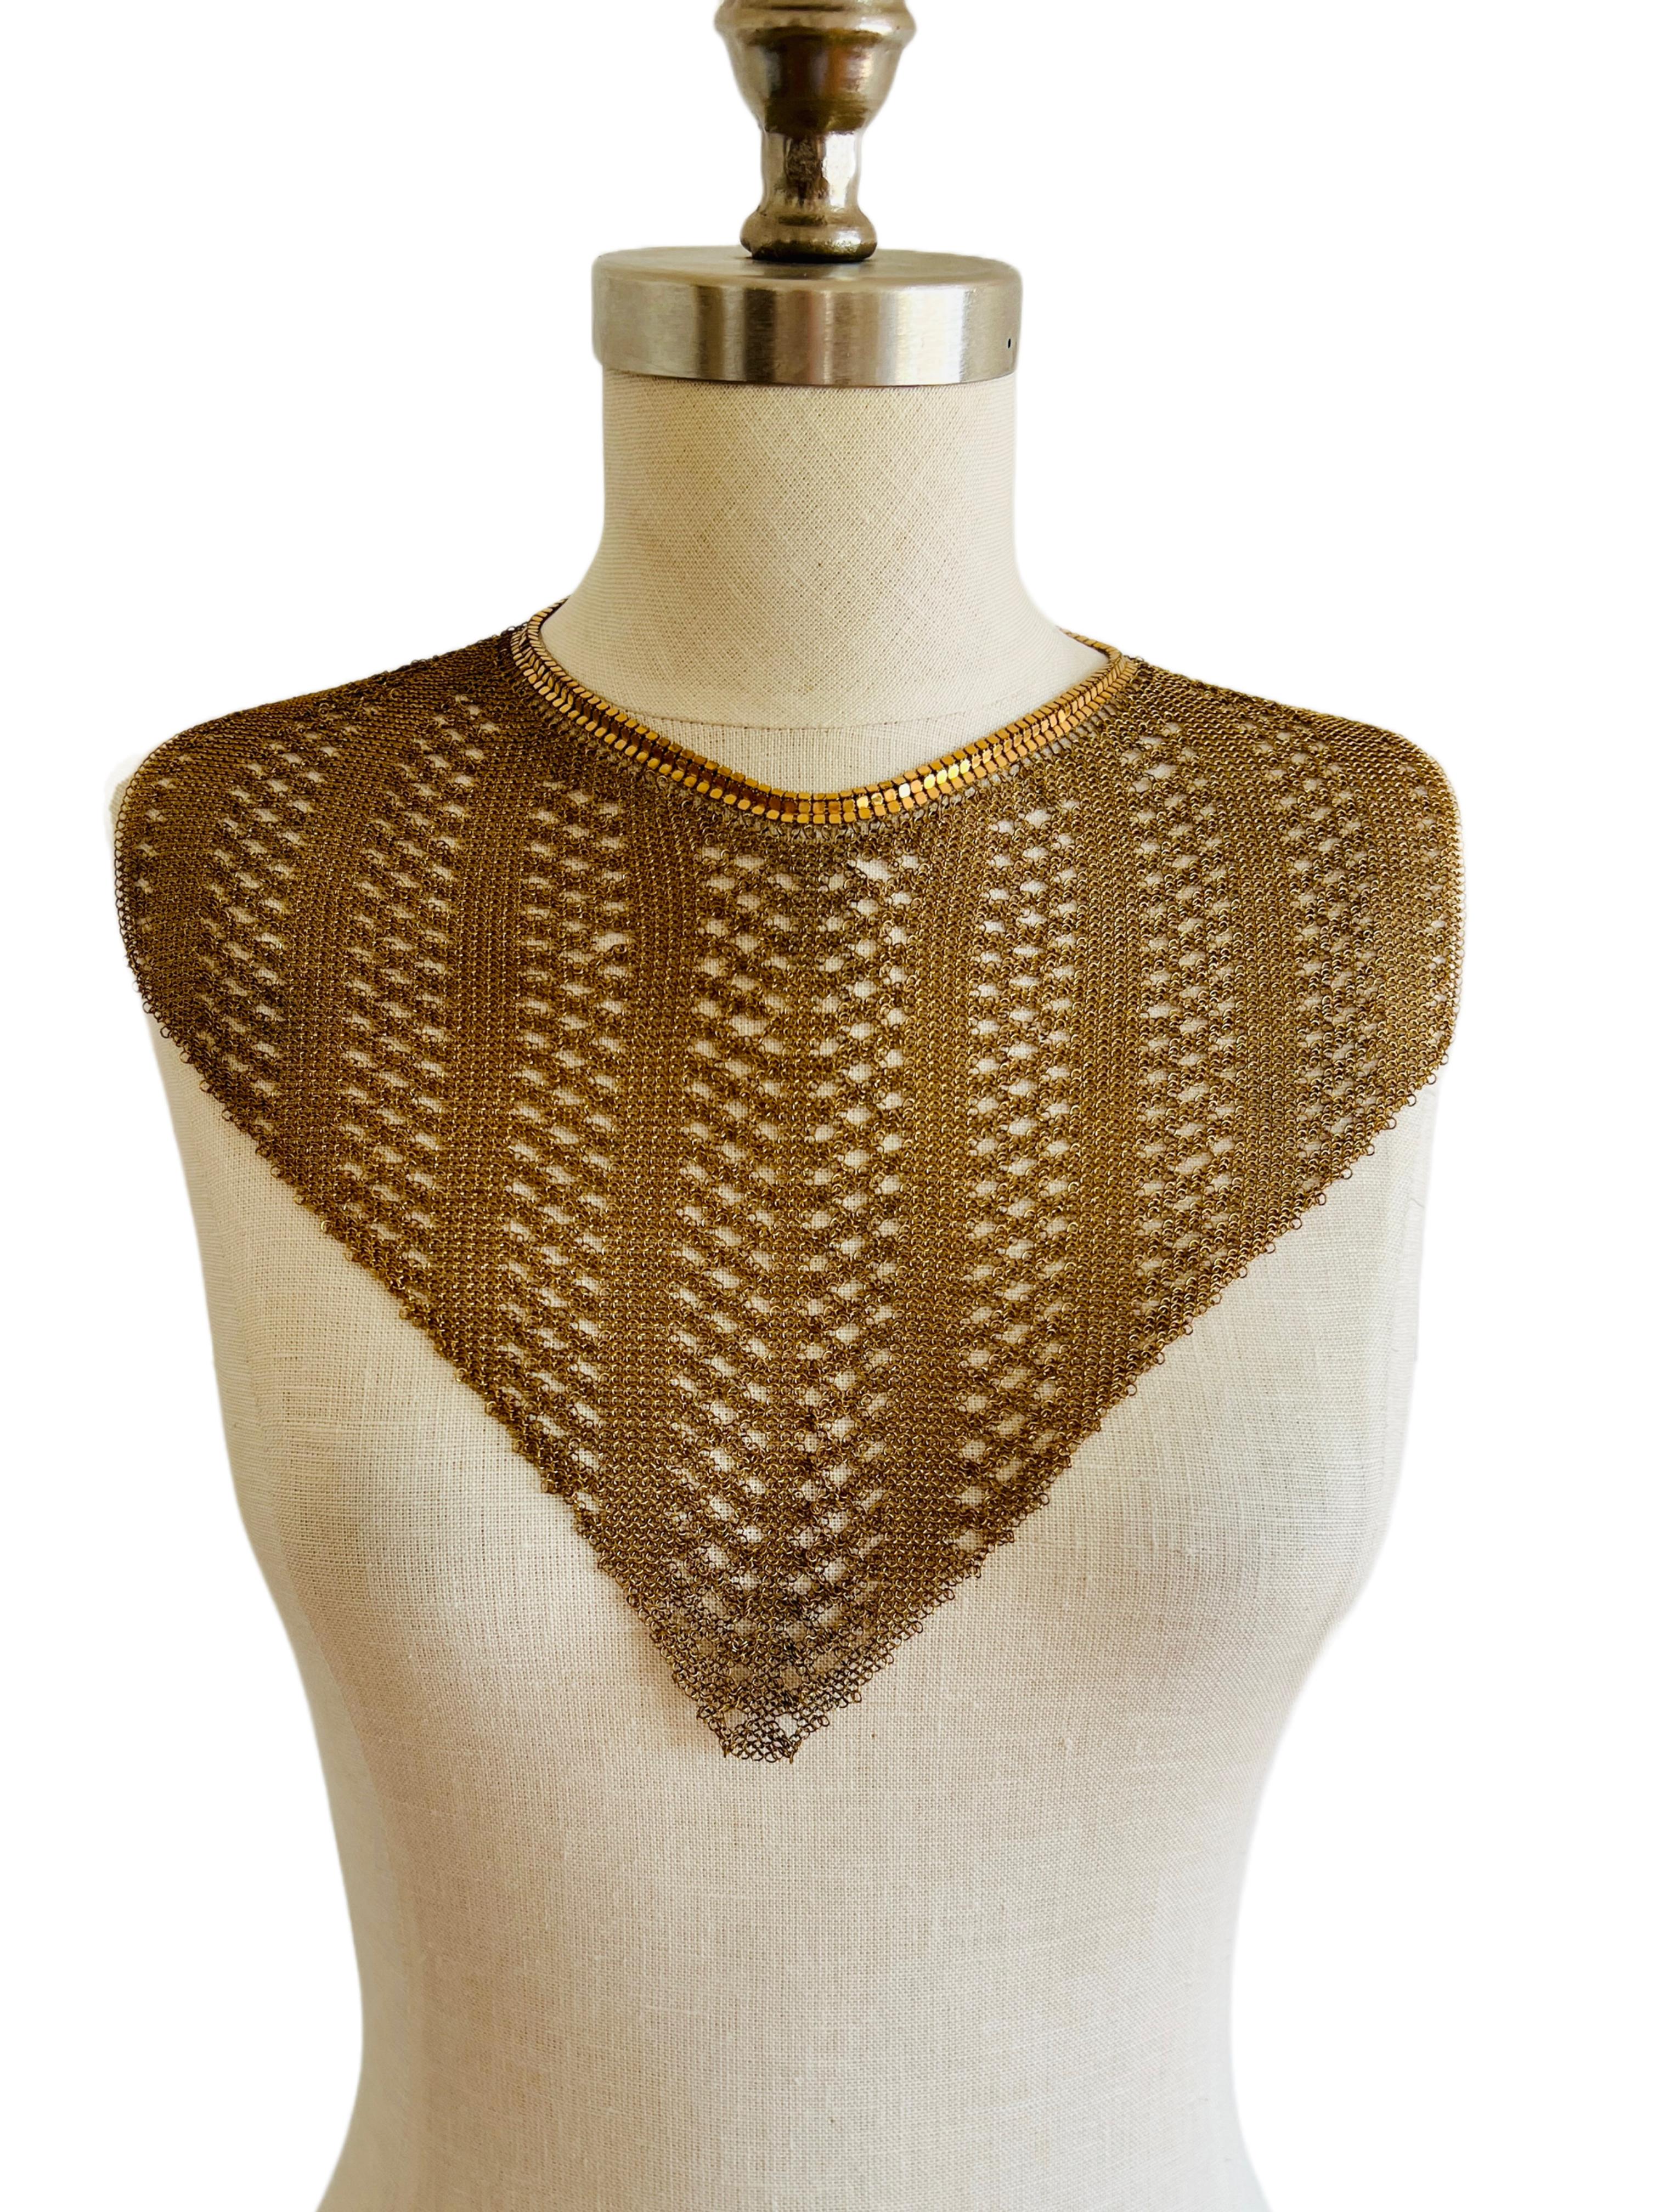 Vintage Gold Mesh Bib Choker Collar Shoulder Necklace, Chain Mail Chainmaille  In Good Condition In Sausalito, CA